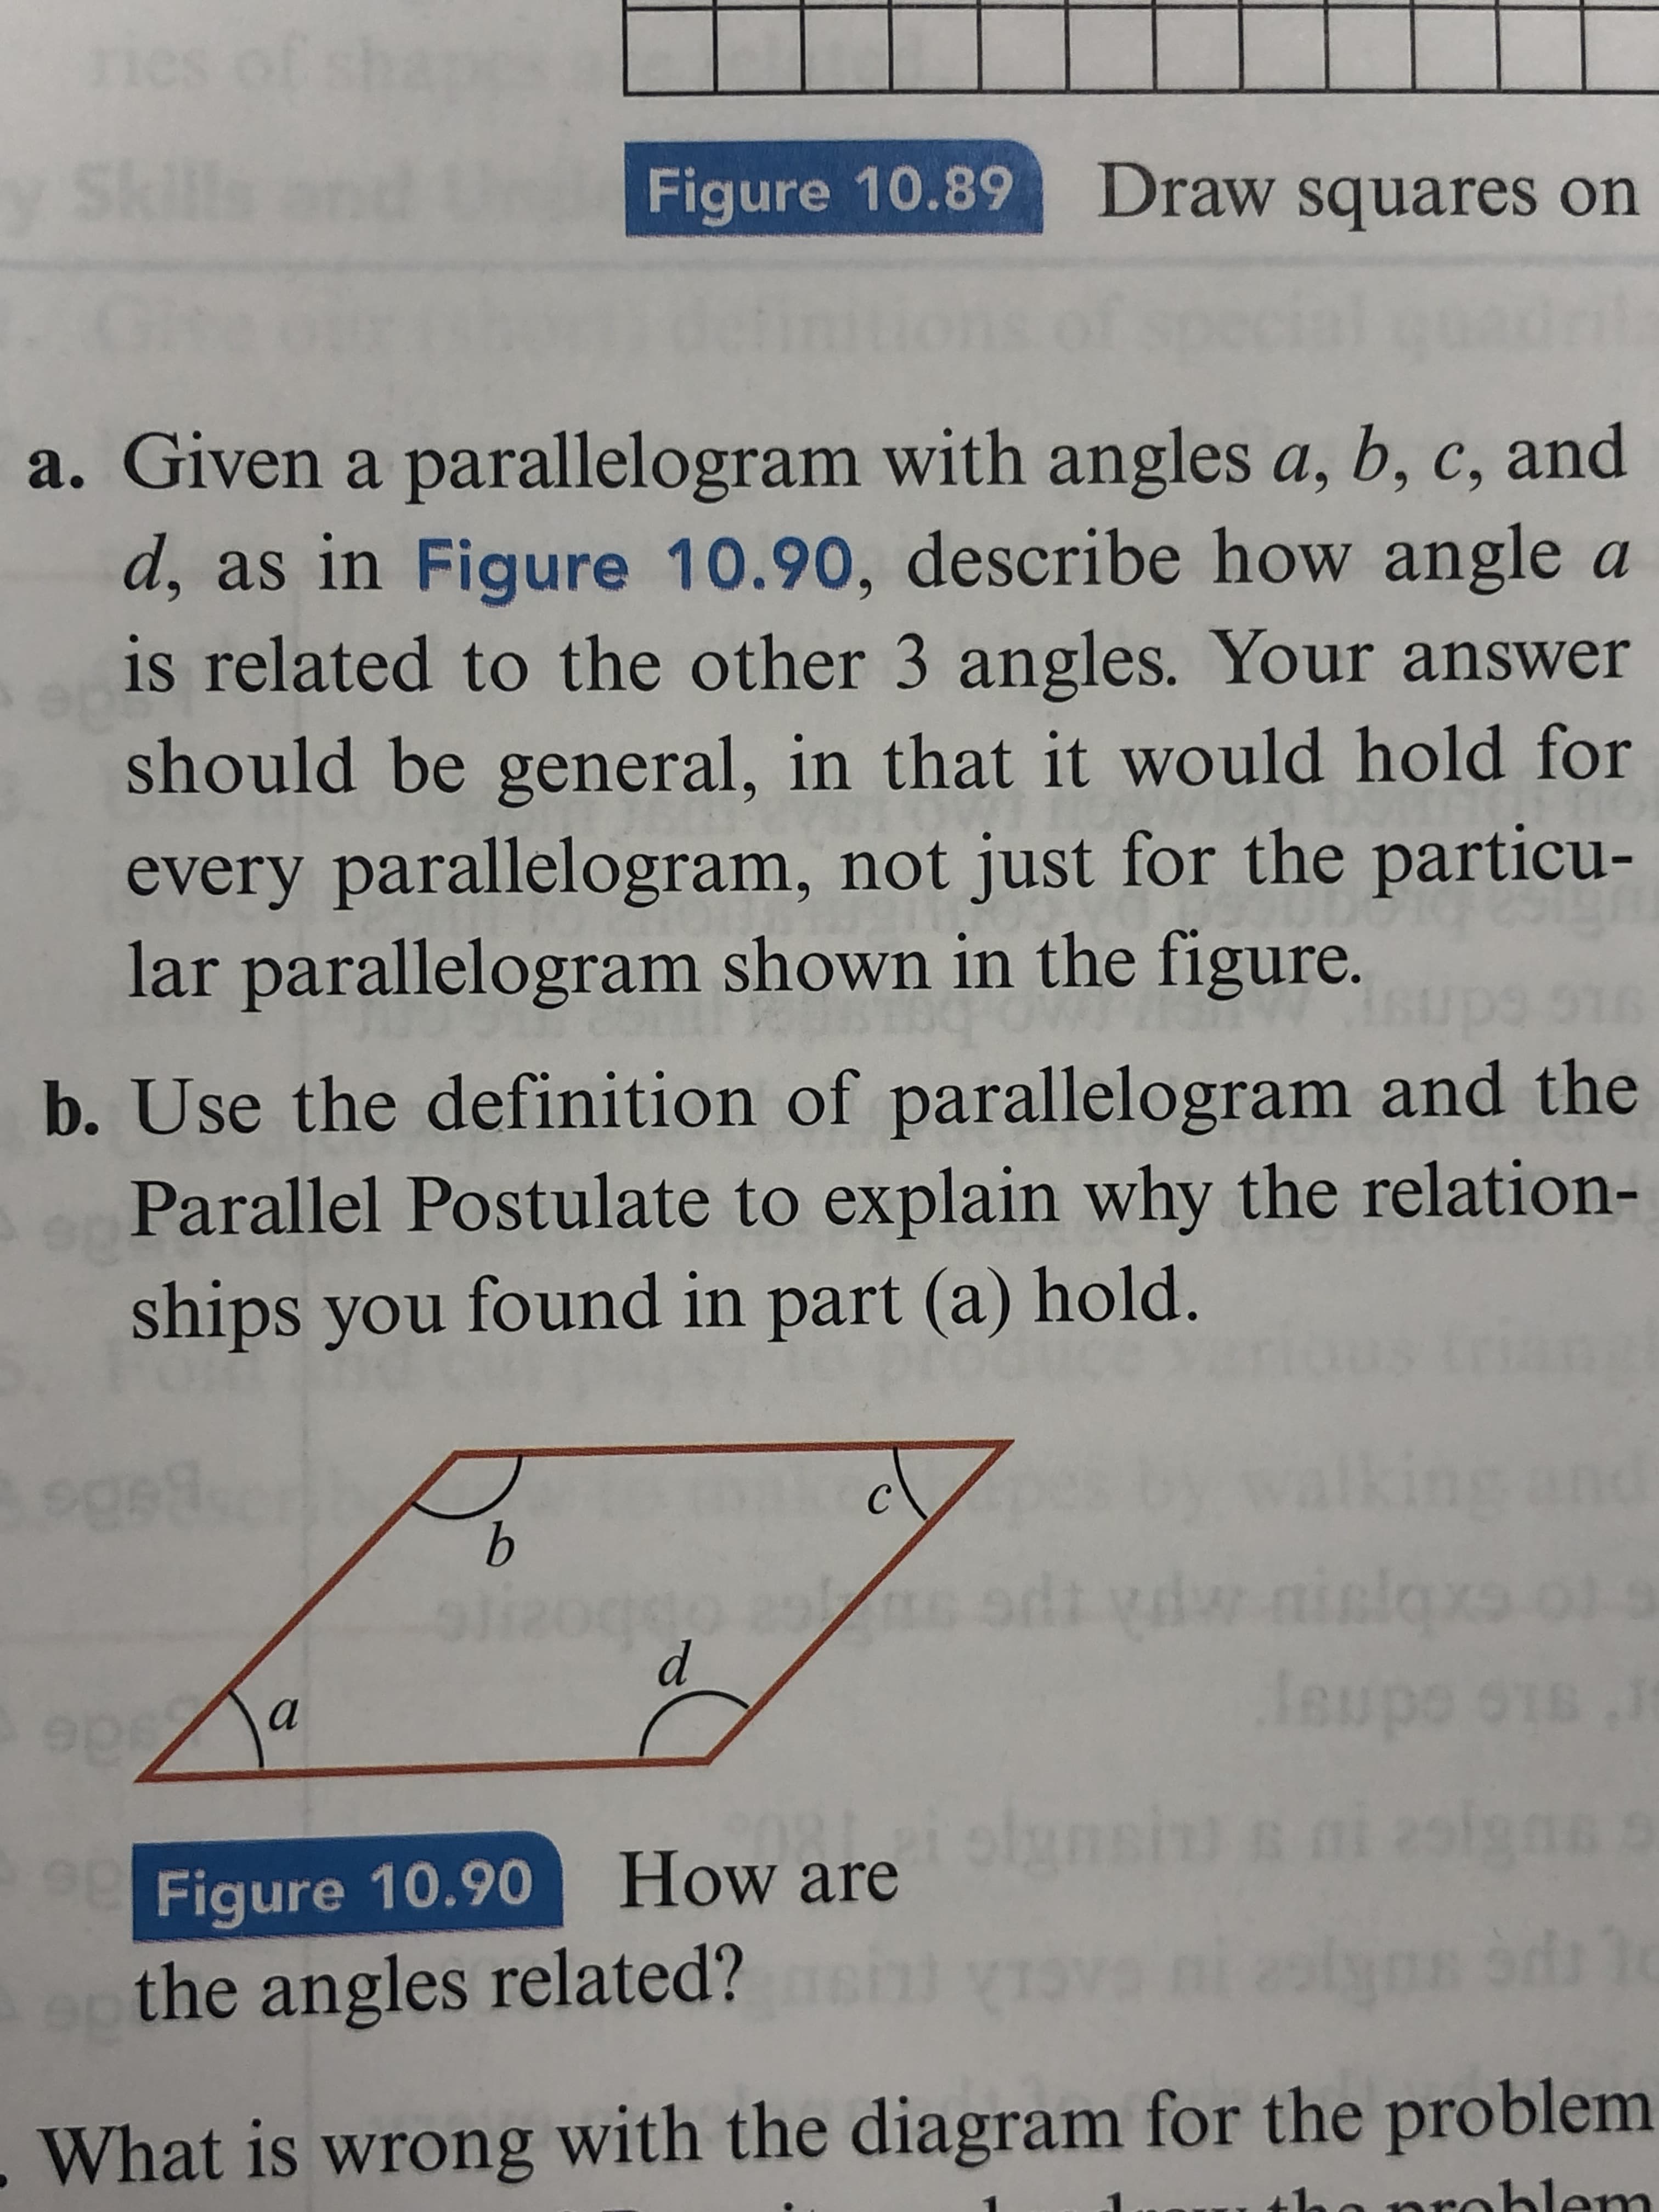 ries of
Sil
Figure 10.89 Draw squares on
dril.
a. Given a parallelogram with angles a, b, c, and
d, as in Figure 10.90, describe how angle a
is related to the other 3 angles. Your answer
should be general, in that it would hold for
every parallelogram, not just for the particu-
lar parallelogram shown in the figure.
b. Use the definition of parallelogram and the
Parallel Postulate to explain why the relation-
ships you found in part (a) hold.
oged
kit
and
b.
nislqxs
leupo o1s
Figure 10.90 How arelnsin s
the angles related?
What is wrong with the diagram for the problem
problem
